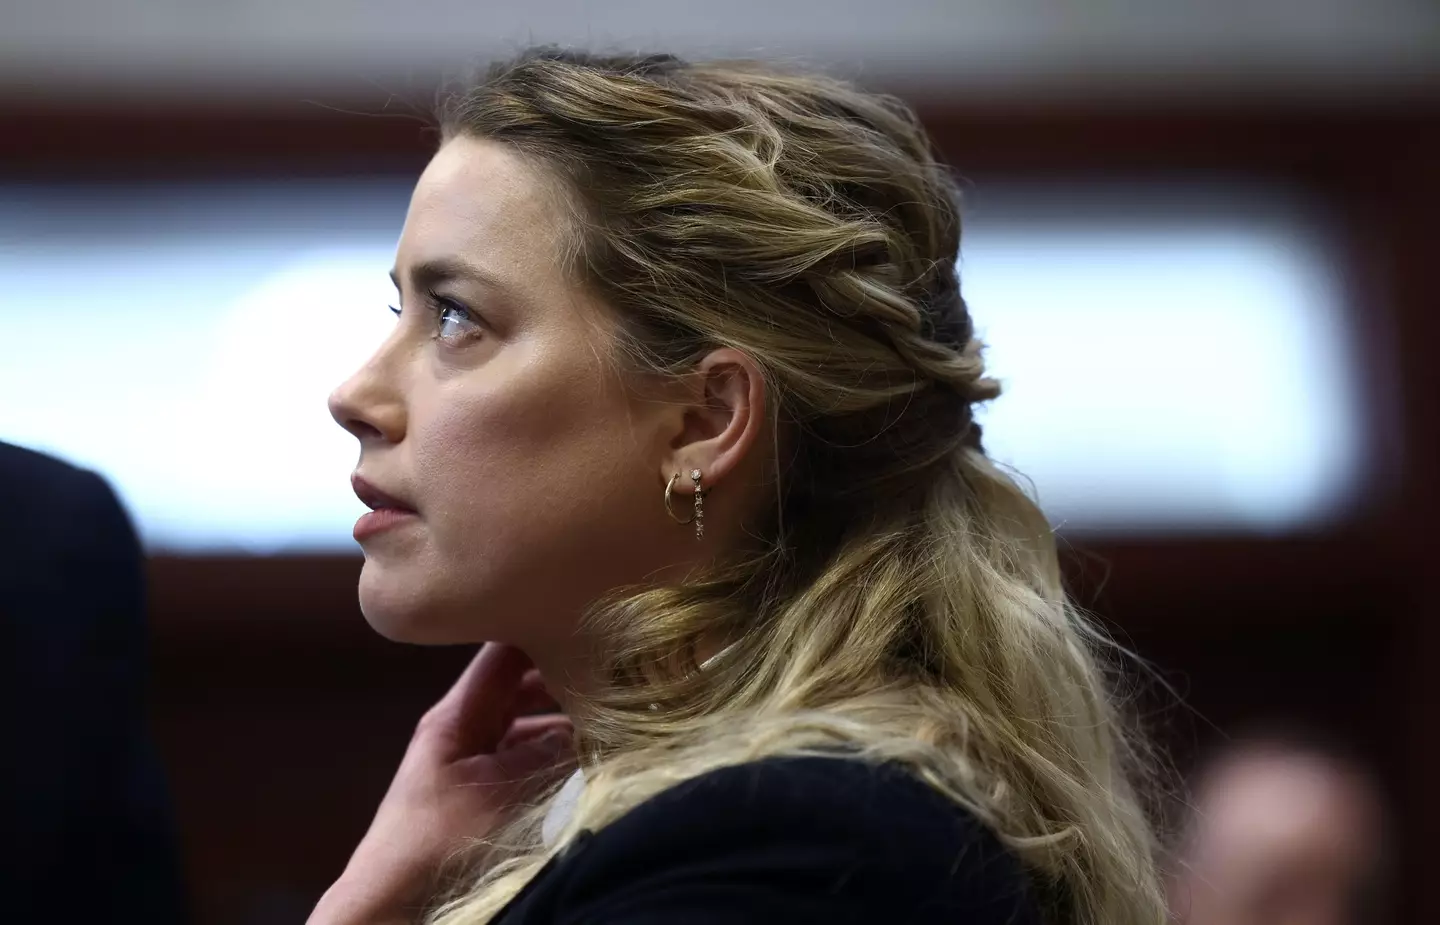 James Franco and Elon Musk won't be testifying during Amber Heard and Johnny Depp's defamation trial.